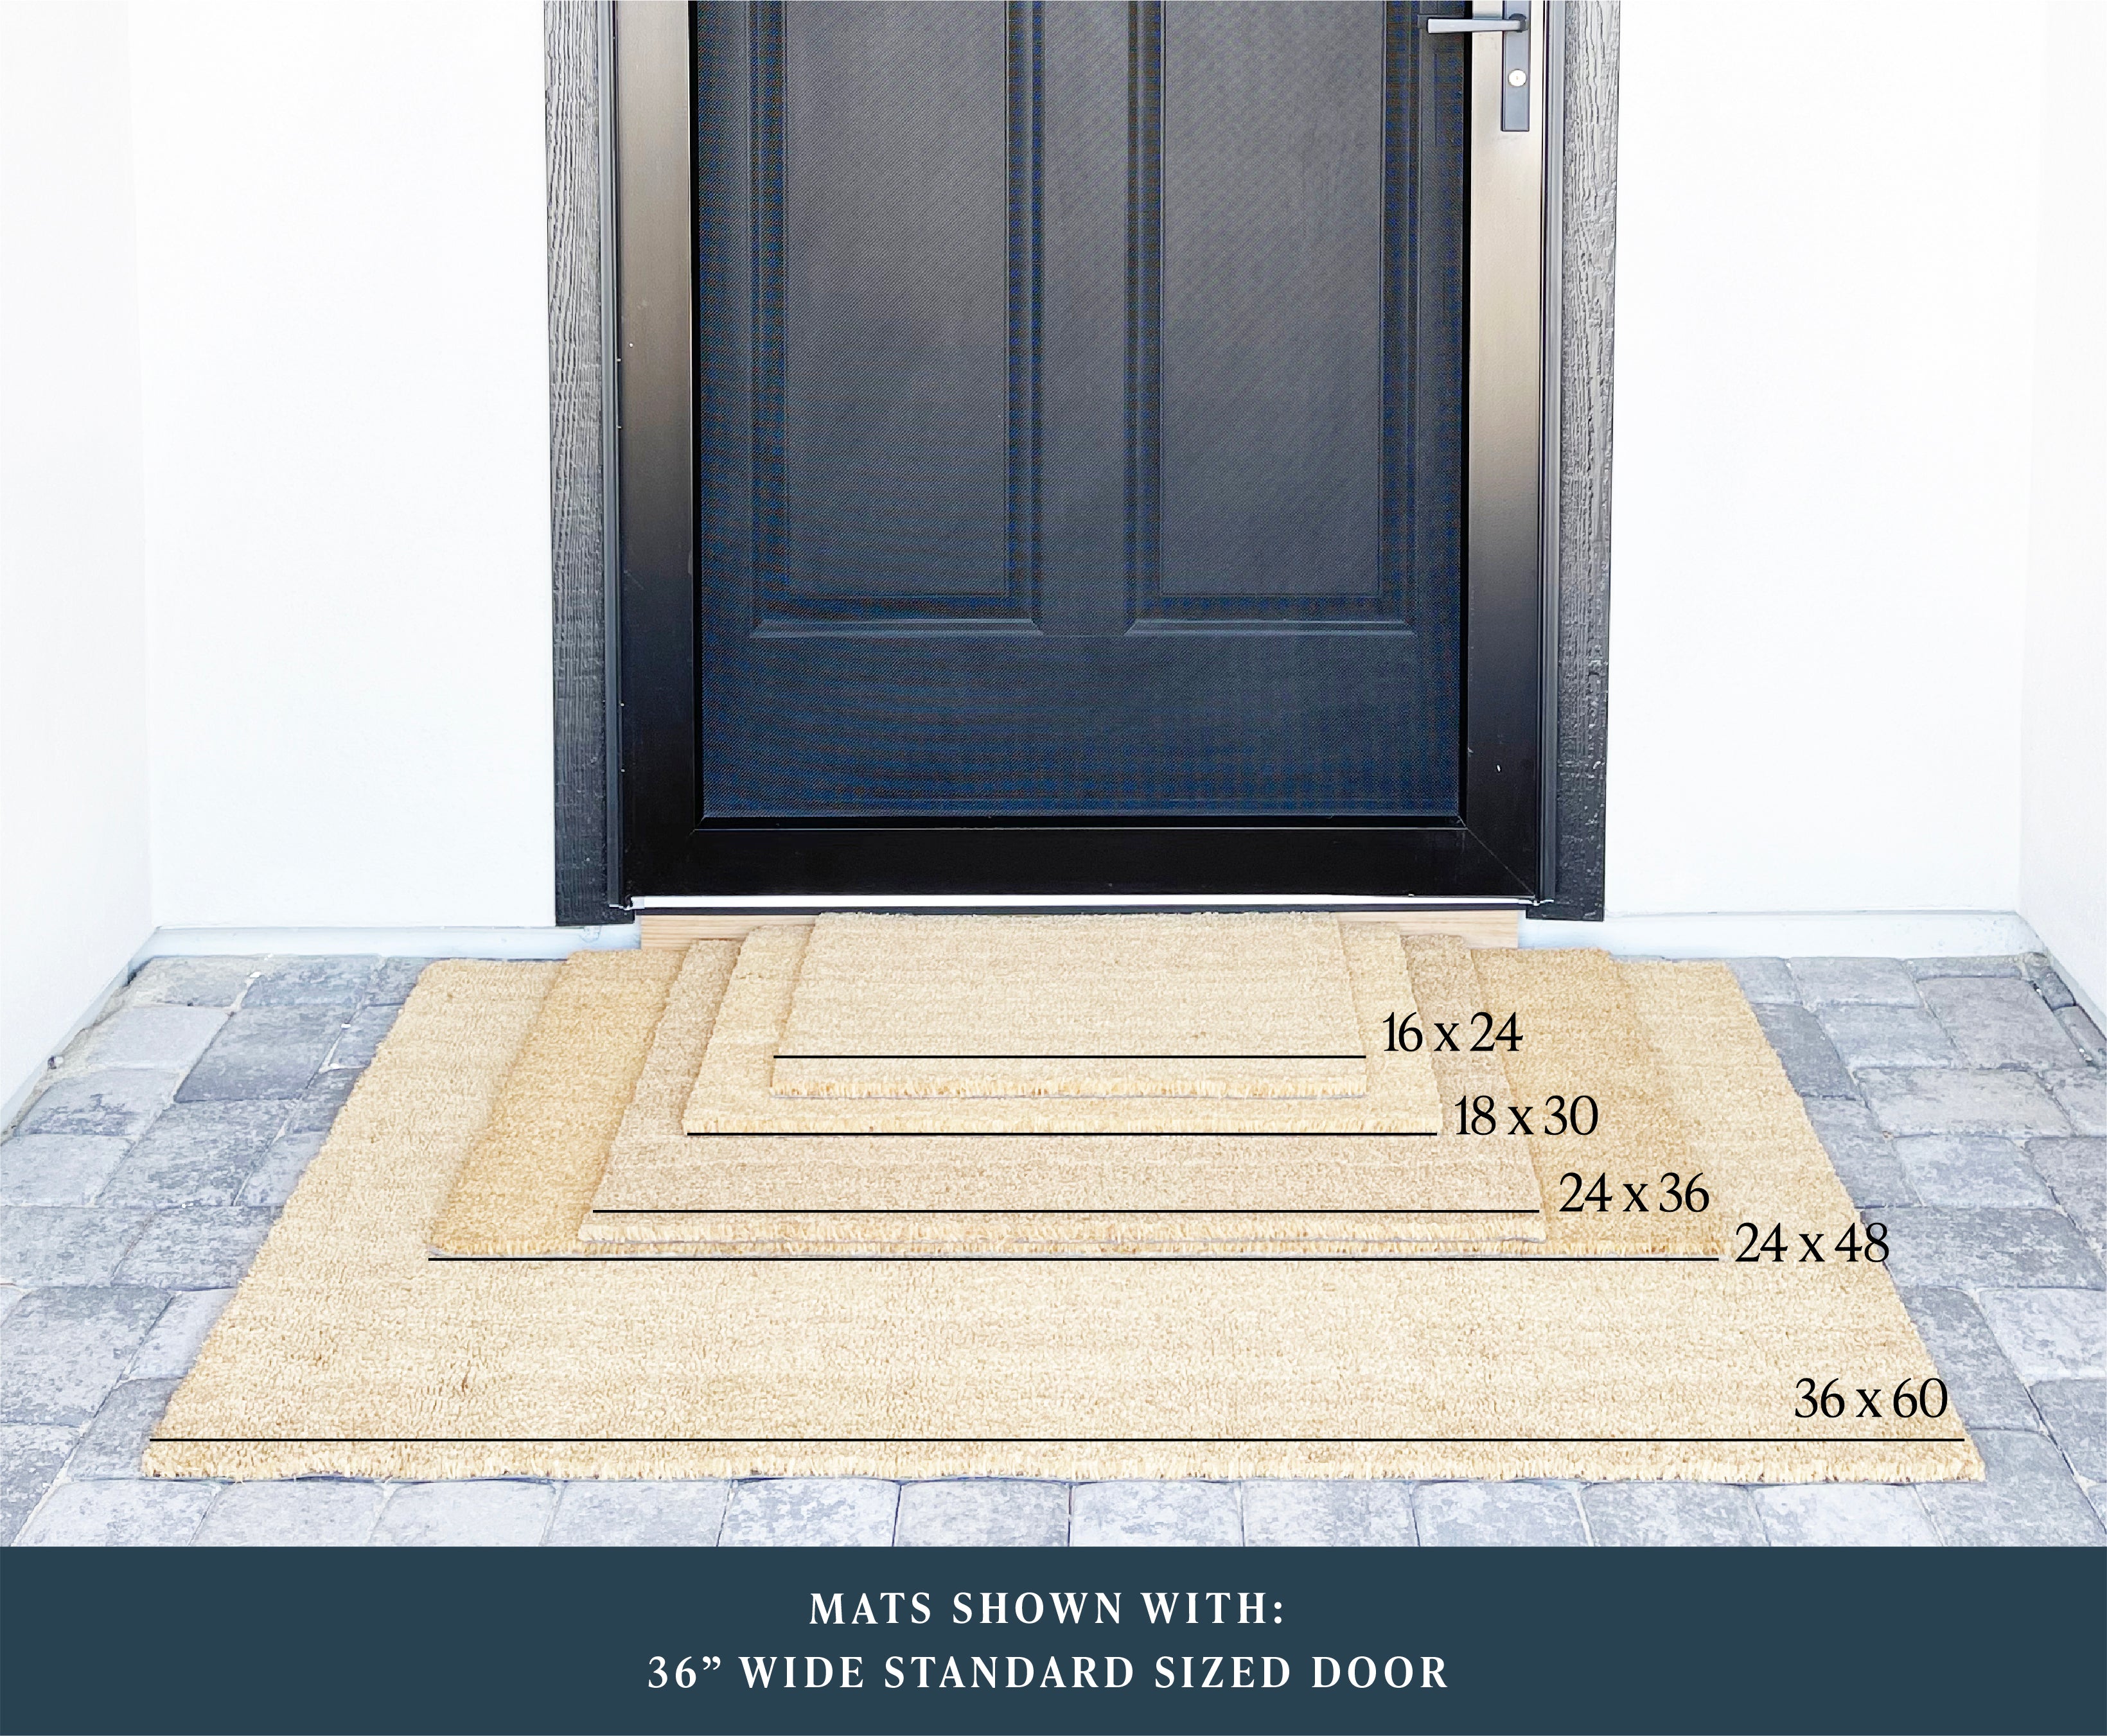 Welcome to our Open House Doormat